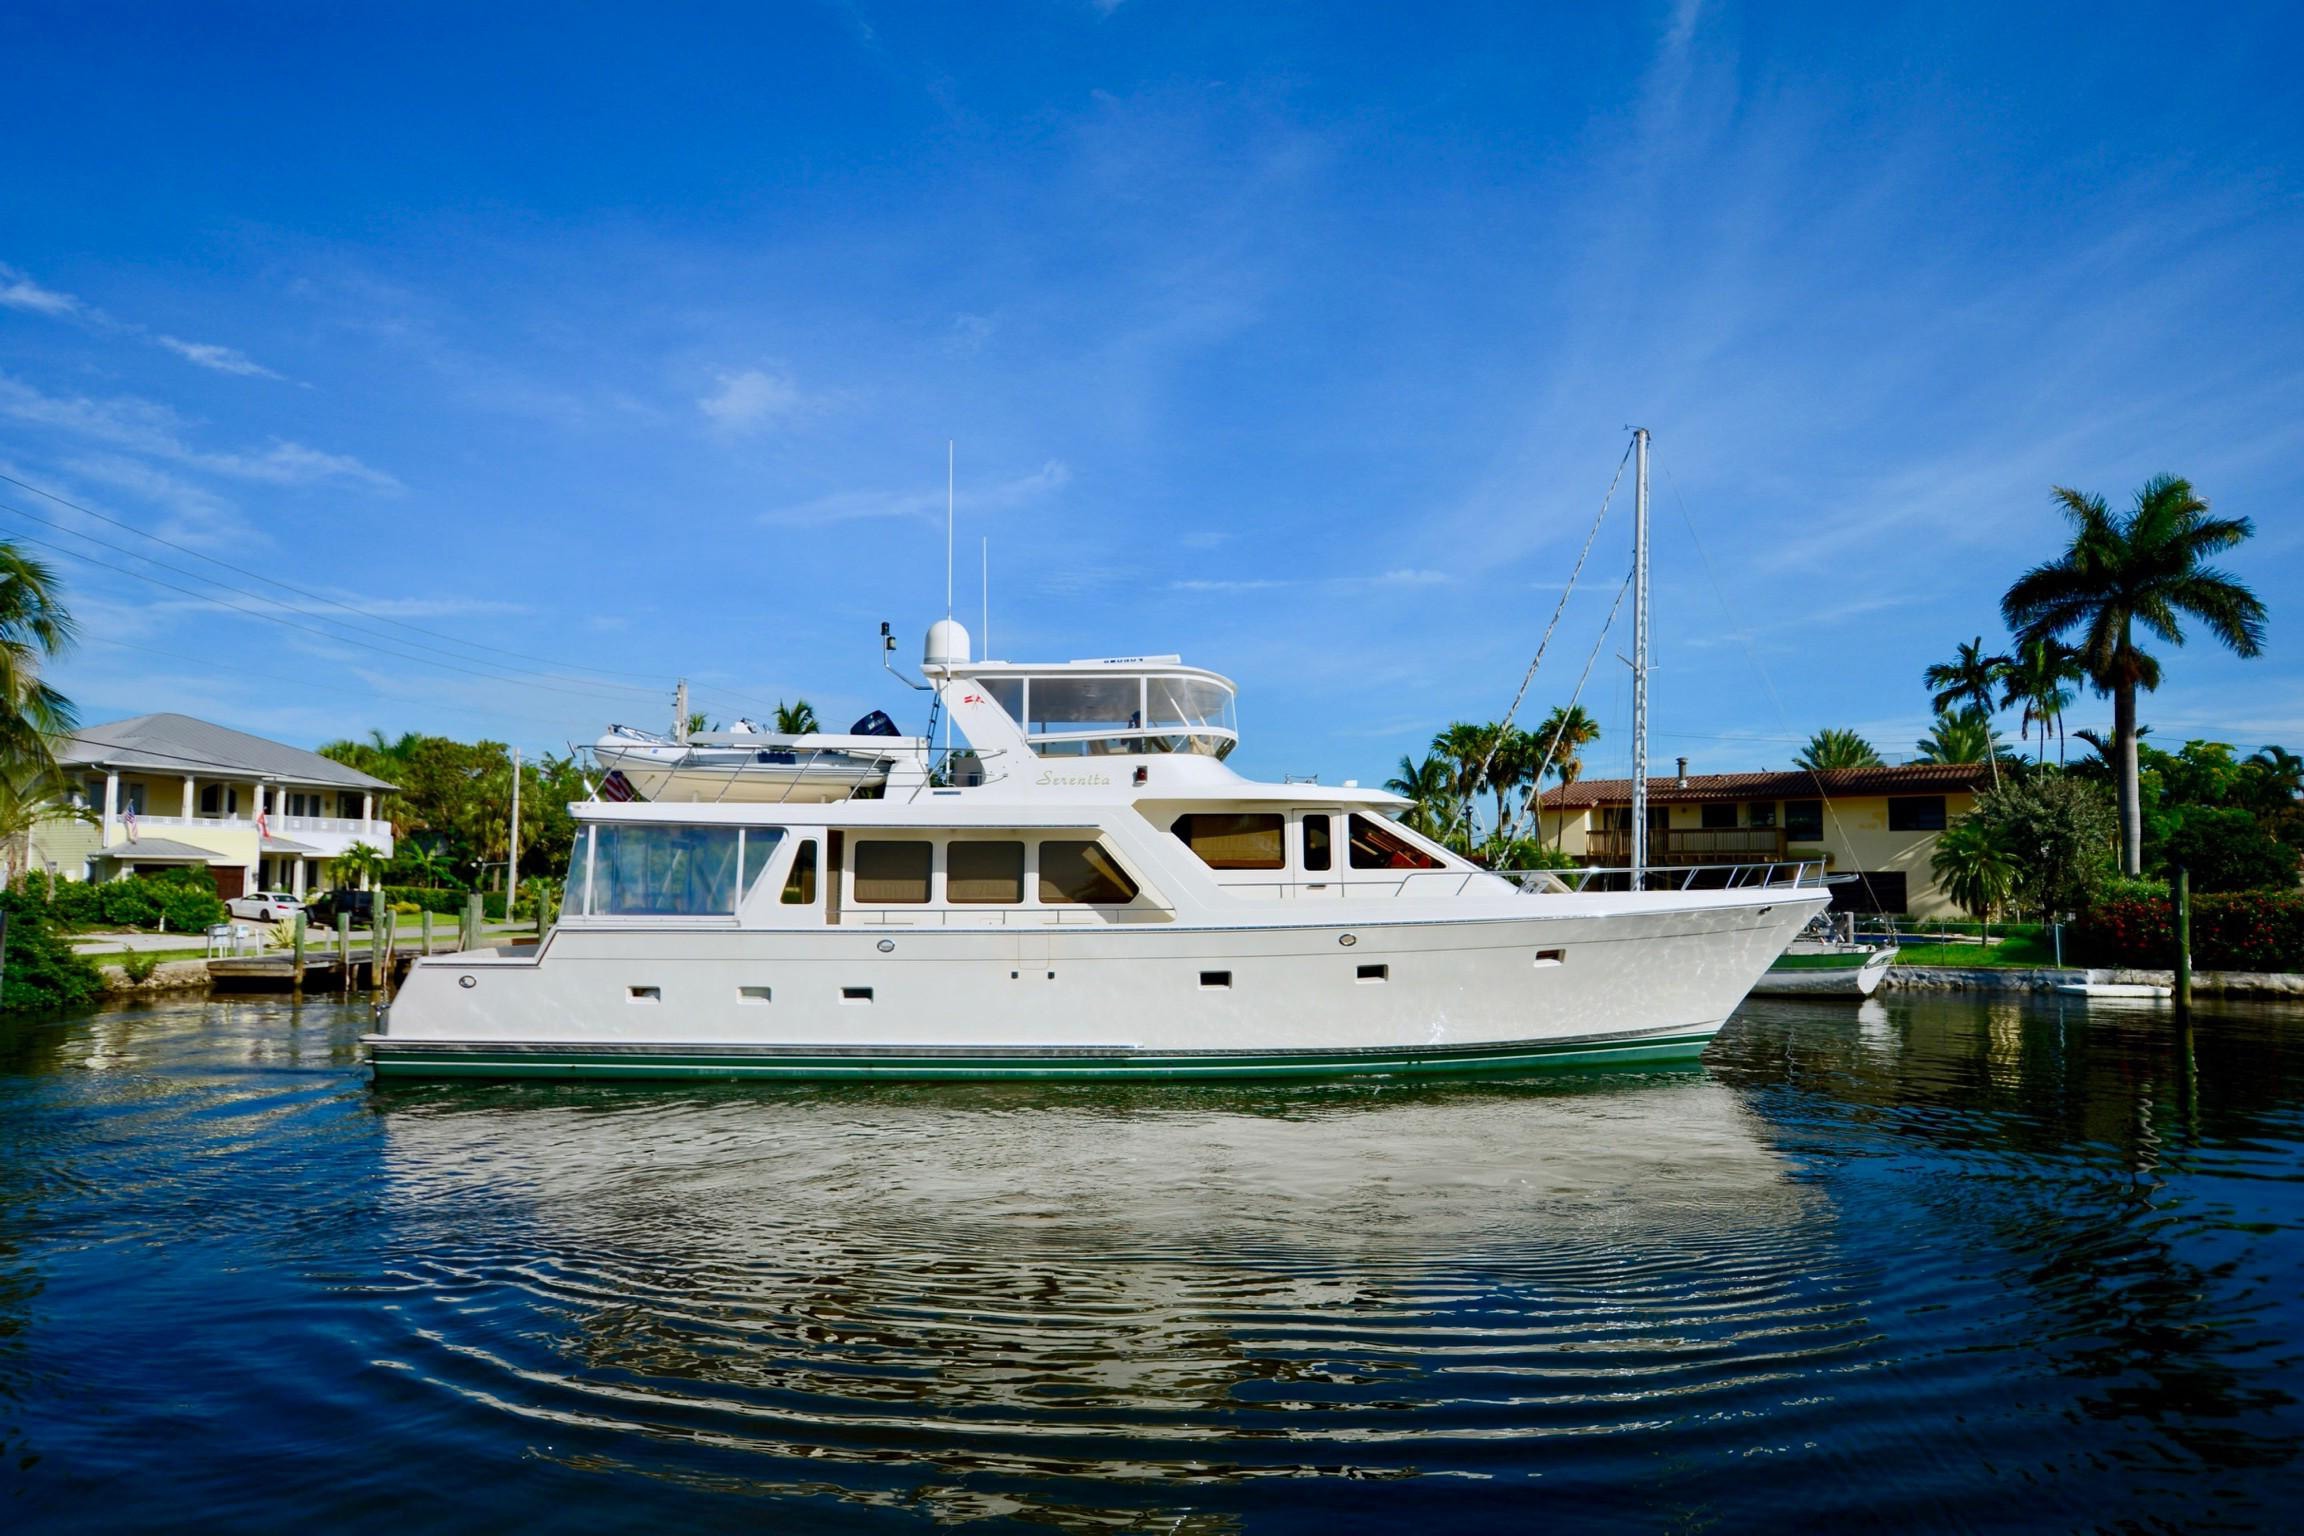 SERENITA charter specs and number of guests